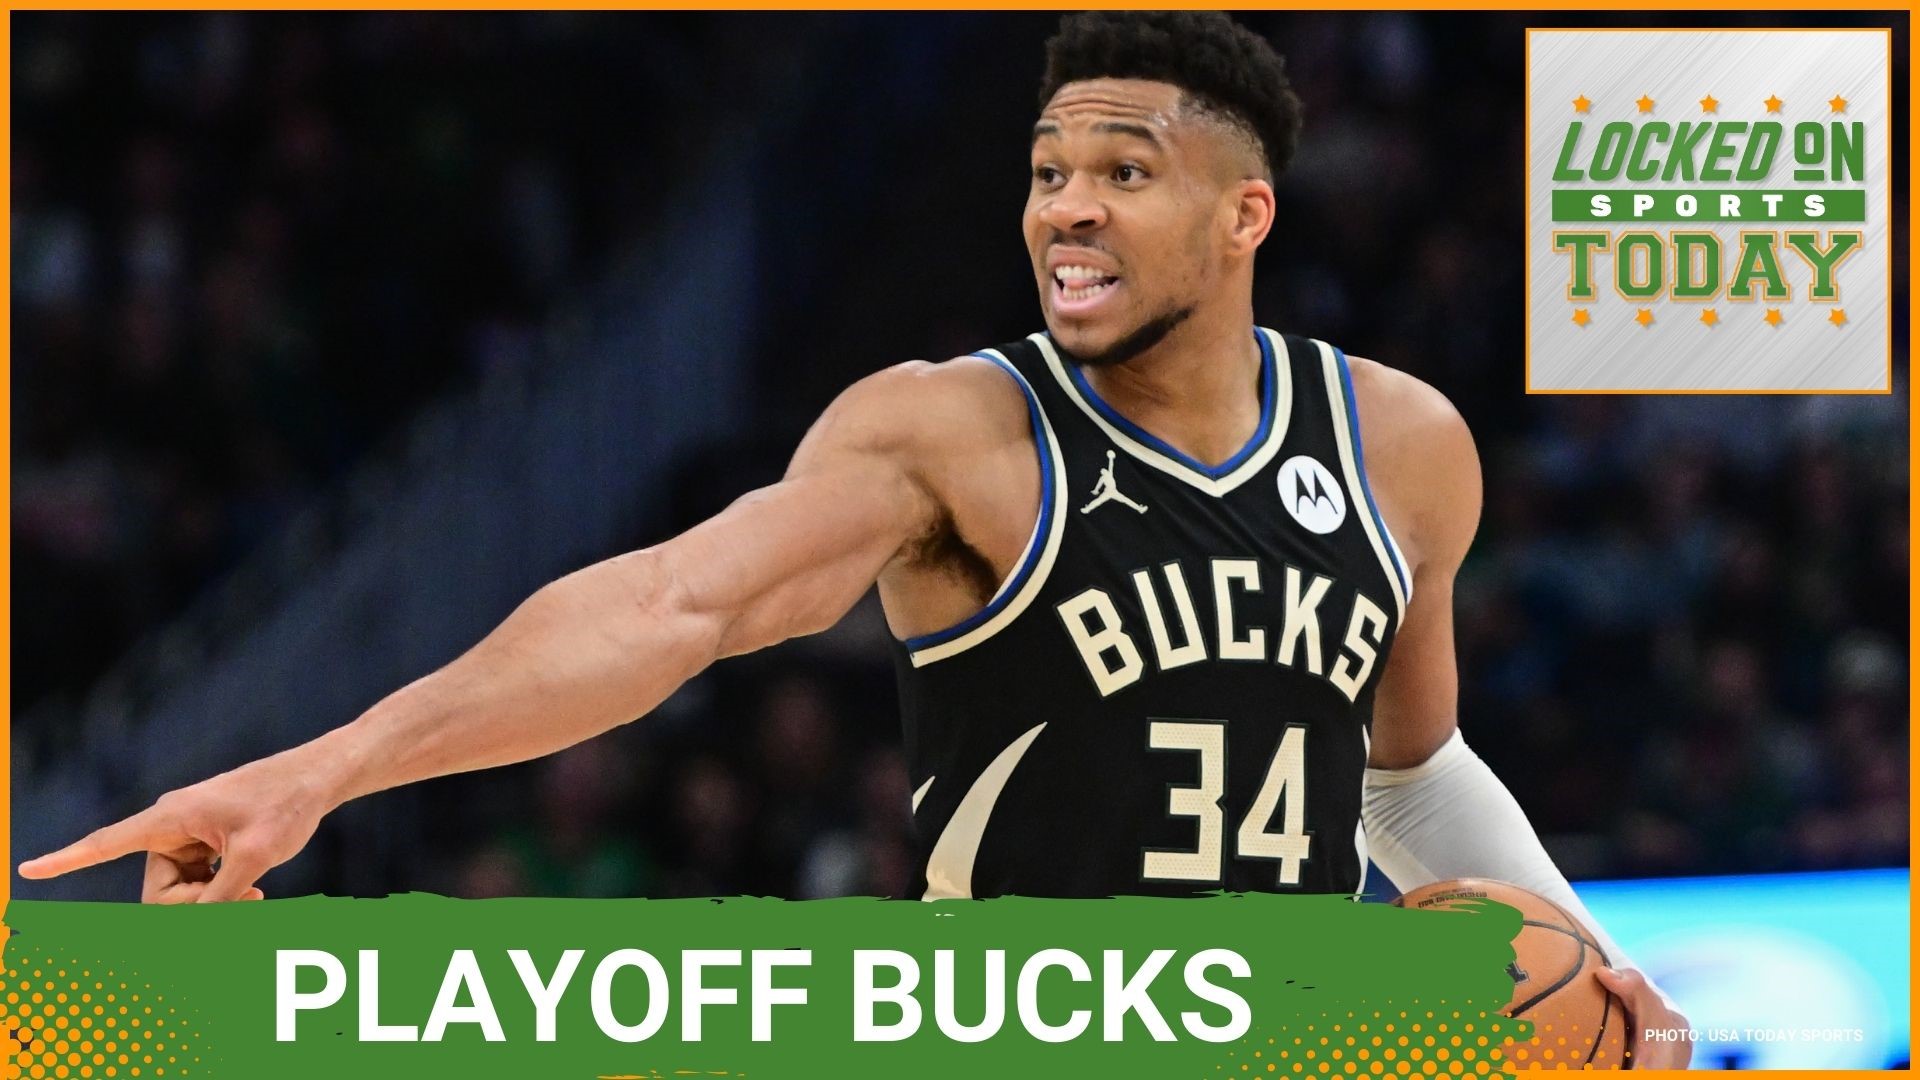 Discussing the day's top sports stories from a much needed win for the the Milwaukee Bucks to the Cardinals NFL draft decisions and more.